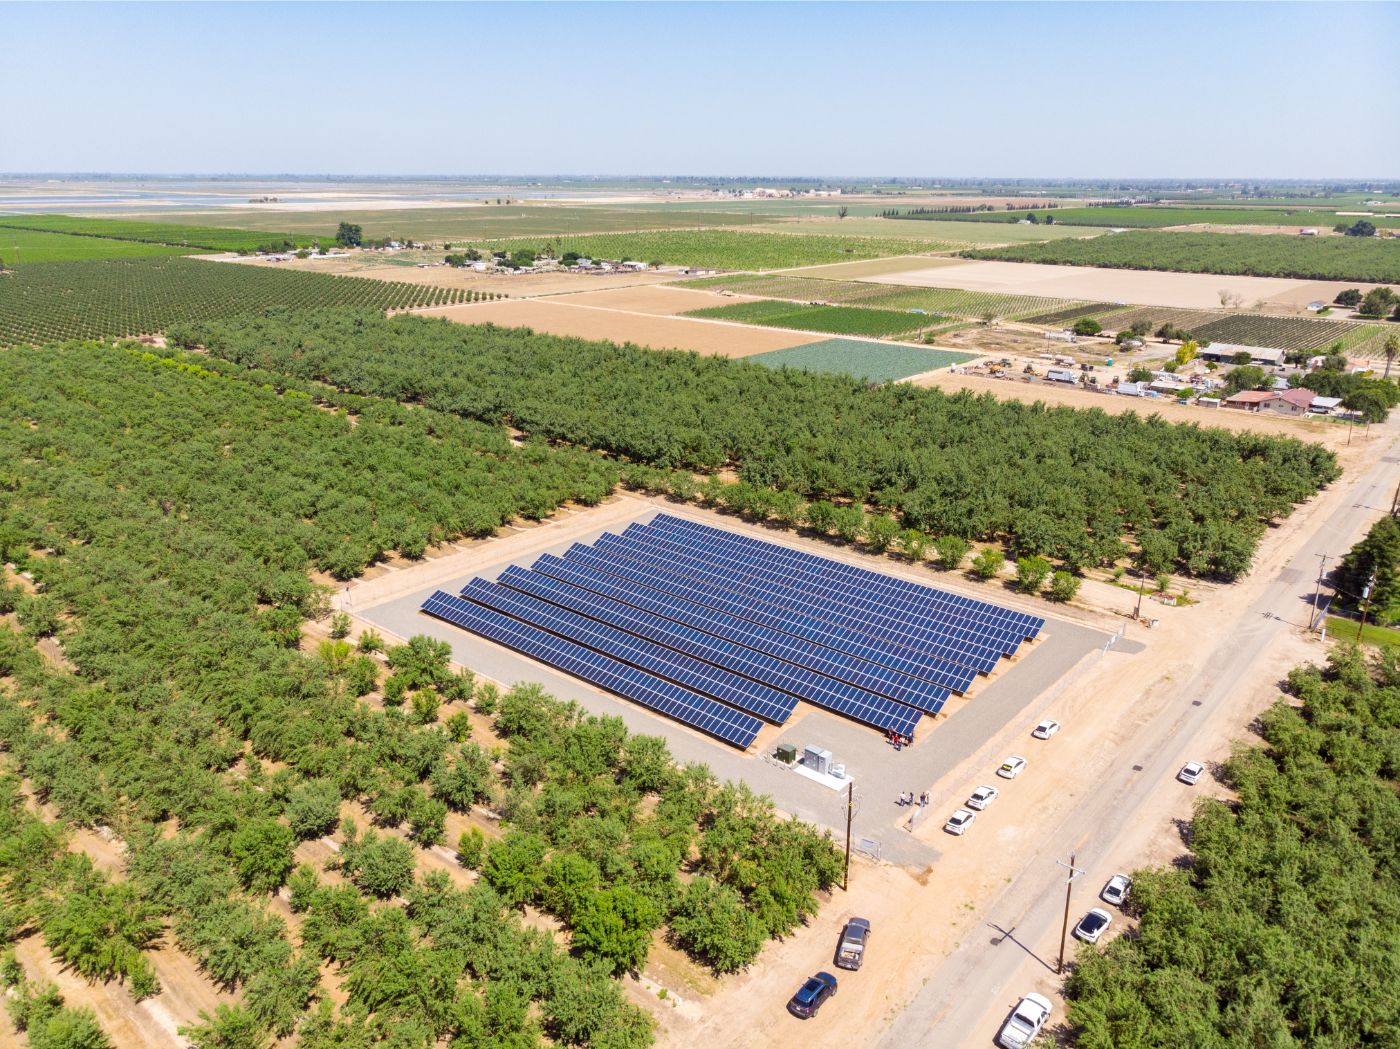 Aerial view of small solar farm at Machado Farms in Fresno surrounded by planted crop trees and farm land.